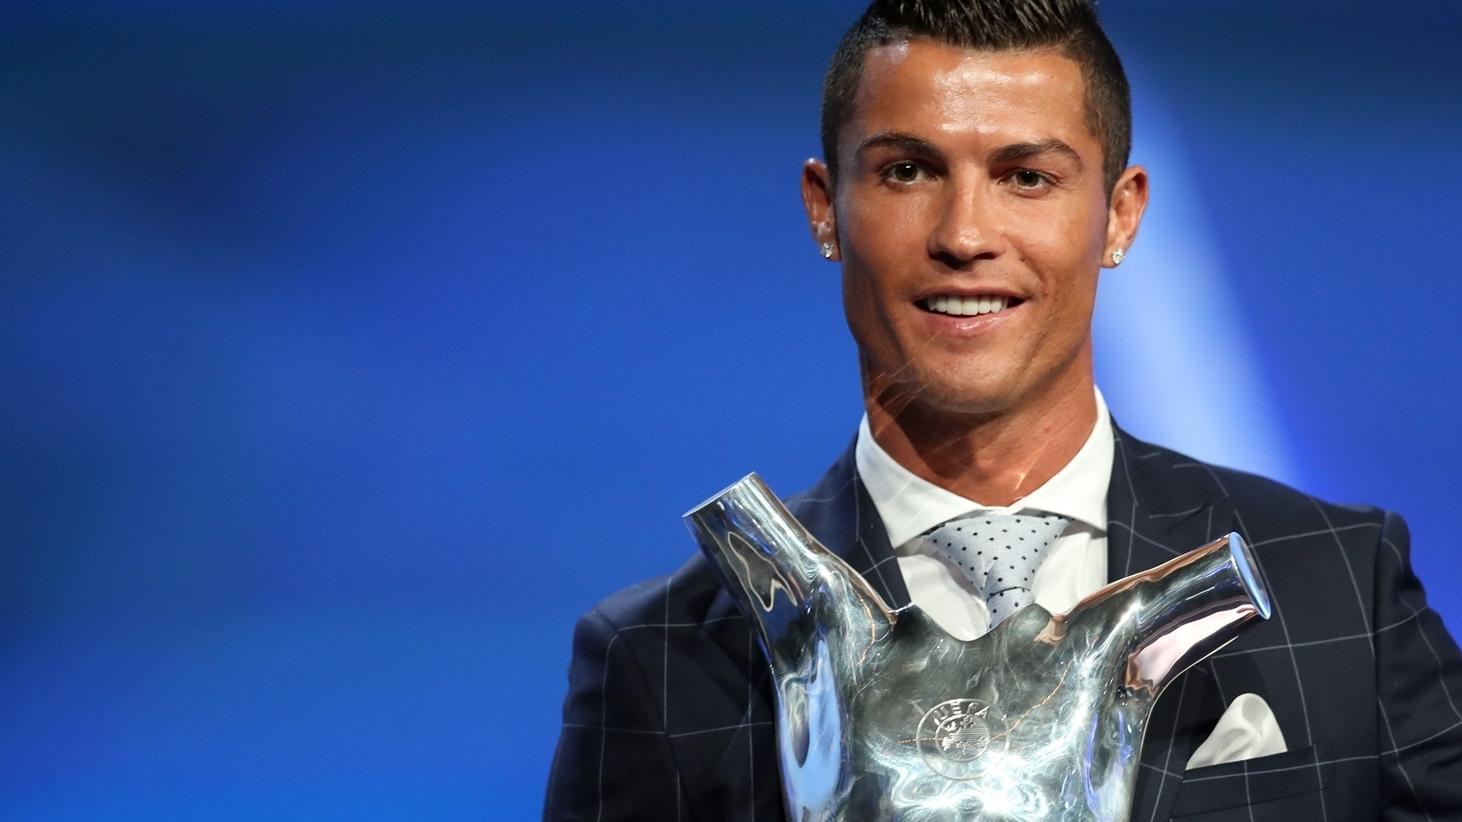 Cristiano Ronaldo named Best Player in Europe UEFA Champions League